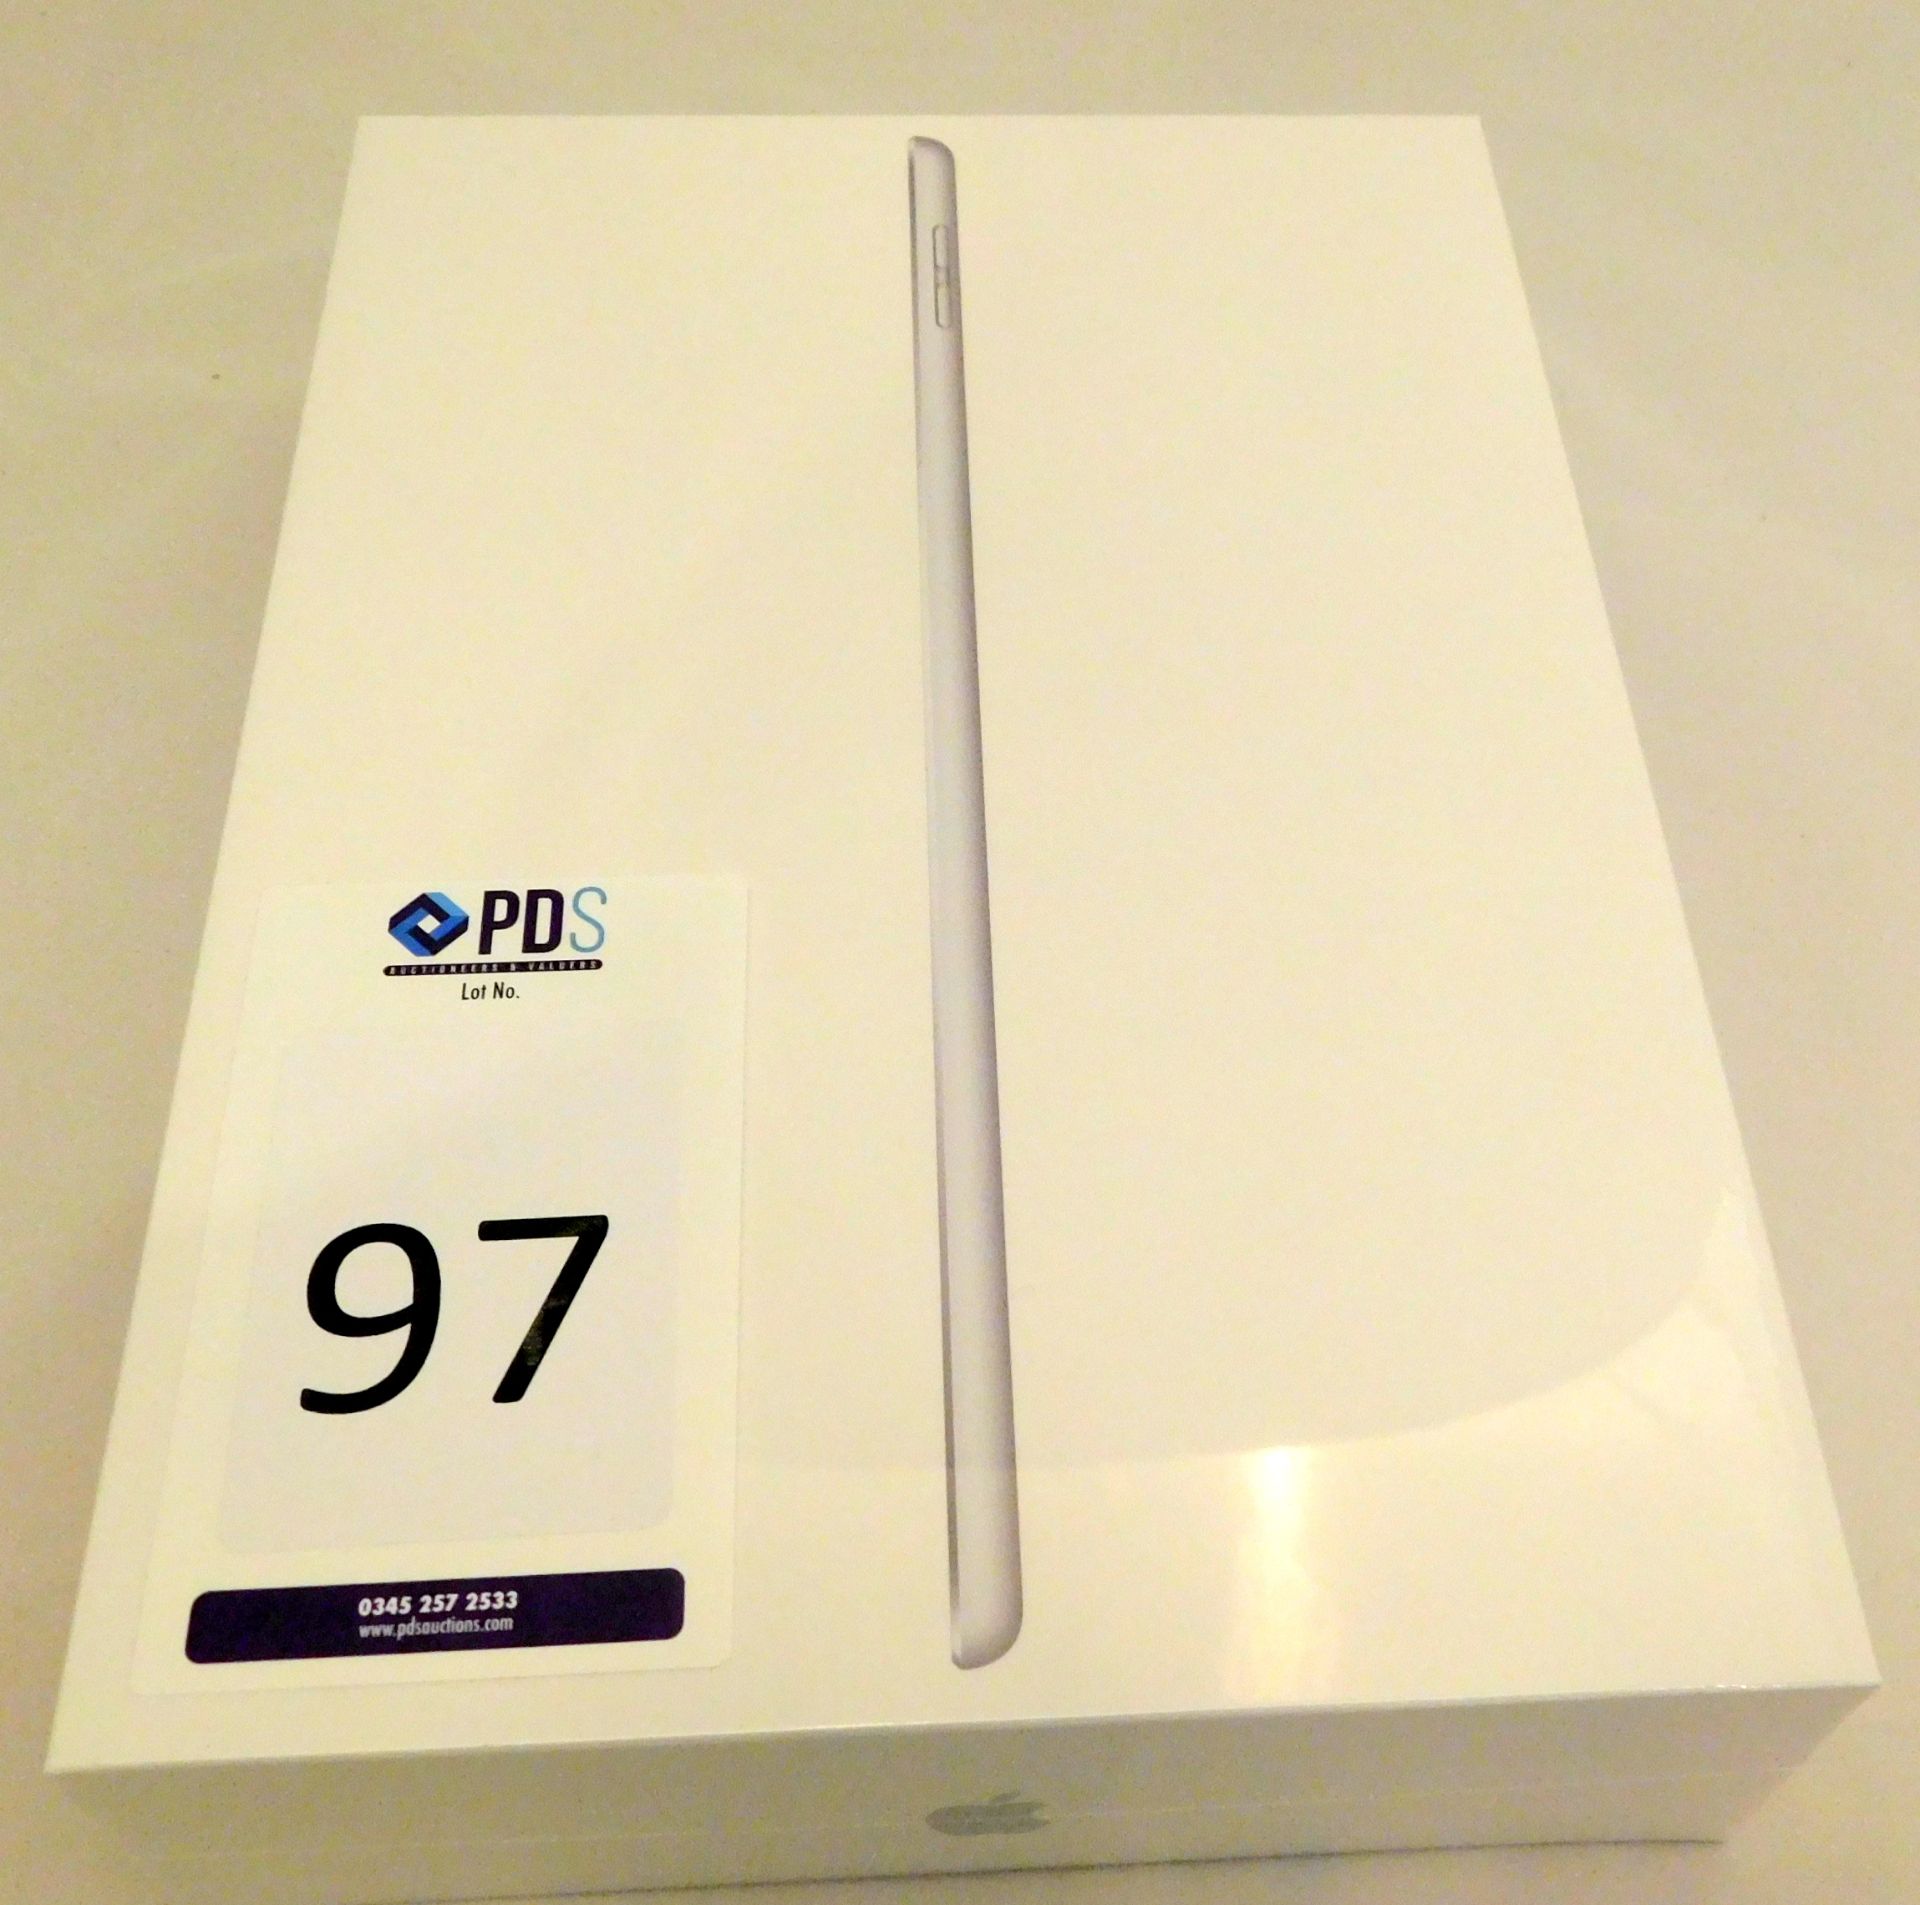 Apple A2197 iPad, 7th Gen, 32GB, Silver, Serial Number: DMPC80TWMF3N, (New in Sealed Box) (Located